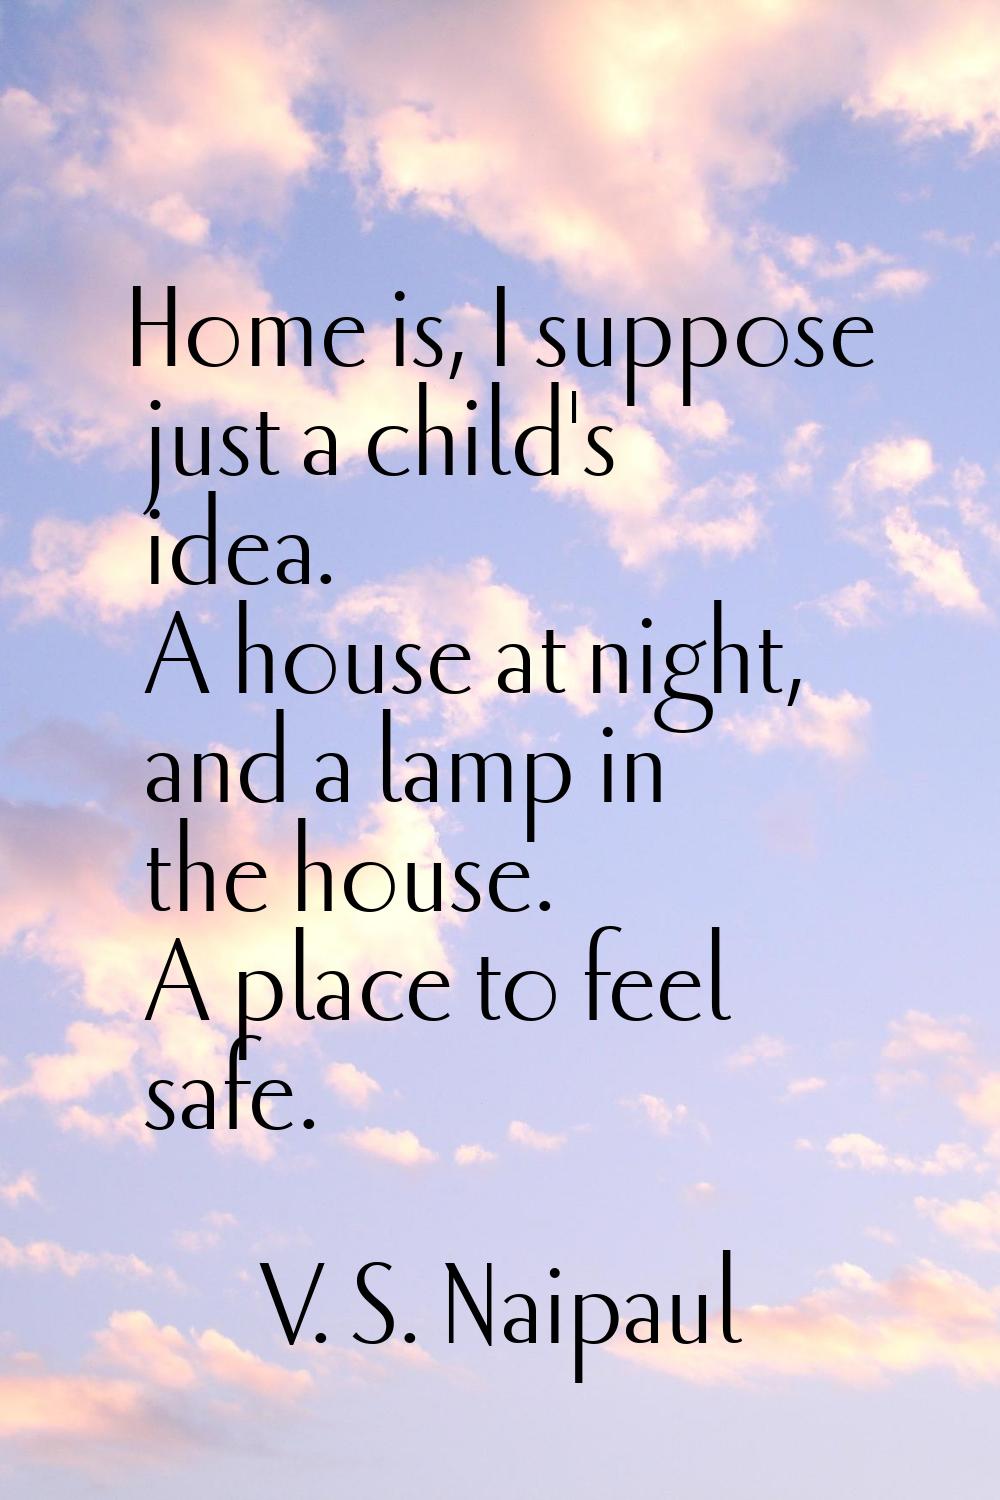 Home is, I suppose just a child's idea. A house at night, and a lamp in the house. A place to feel 